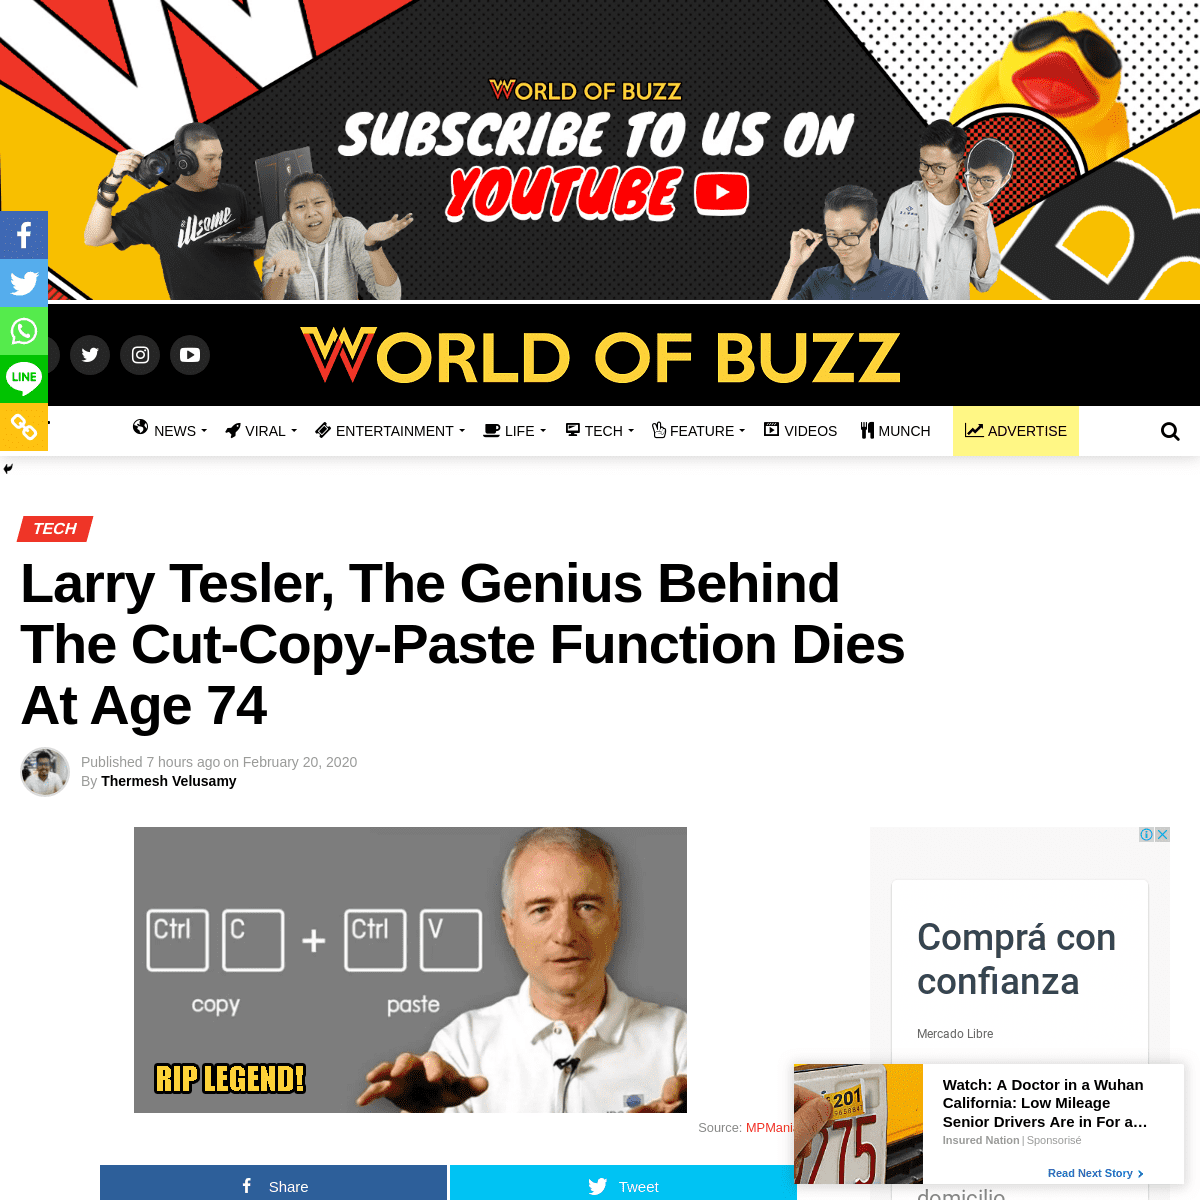 A complete backup of www.worldofbuzz.com/larry-tesler-the-genius-behind-the-cut-copy-paste-function-dies-at-age-74/